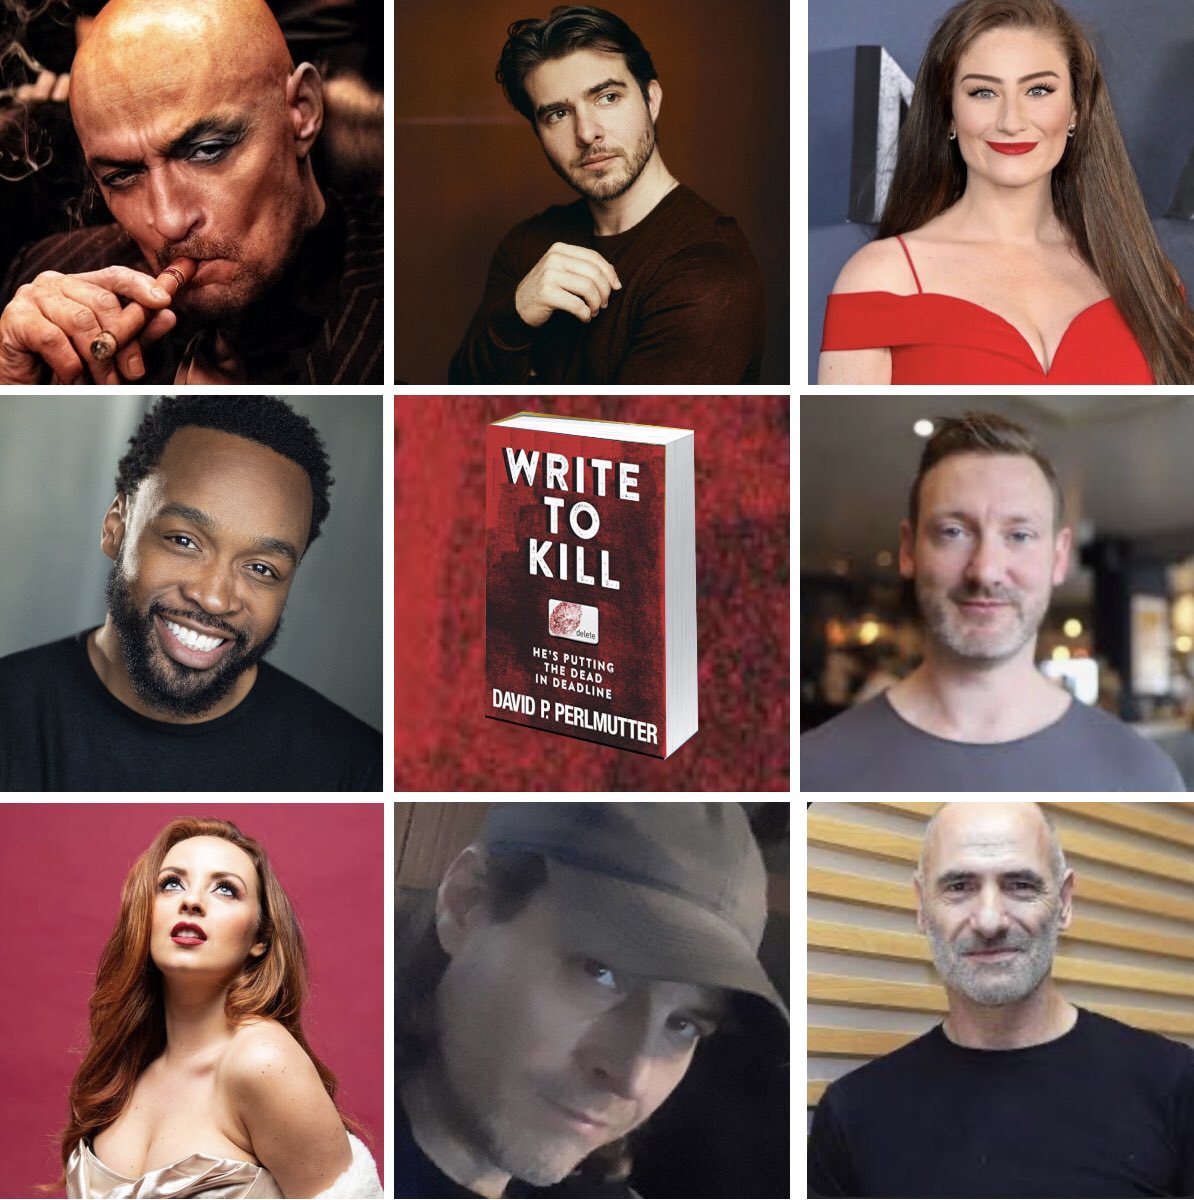 @coffeeandbook9 WE ARE TRYING TO GIVE READERS WHAT THEY WANT - A TV SERIES OF WRITE TO KILL ✍🏼🎬📺 

The @Kickstarter funding campaign for filming of the #TVPilot for #WriteToKill is LIVE, starring an INTERNATIONAL CAST - If you want to be involved as a producer, actor, or wish to back this…